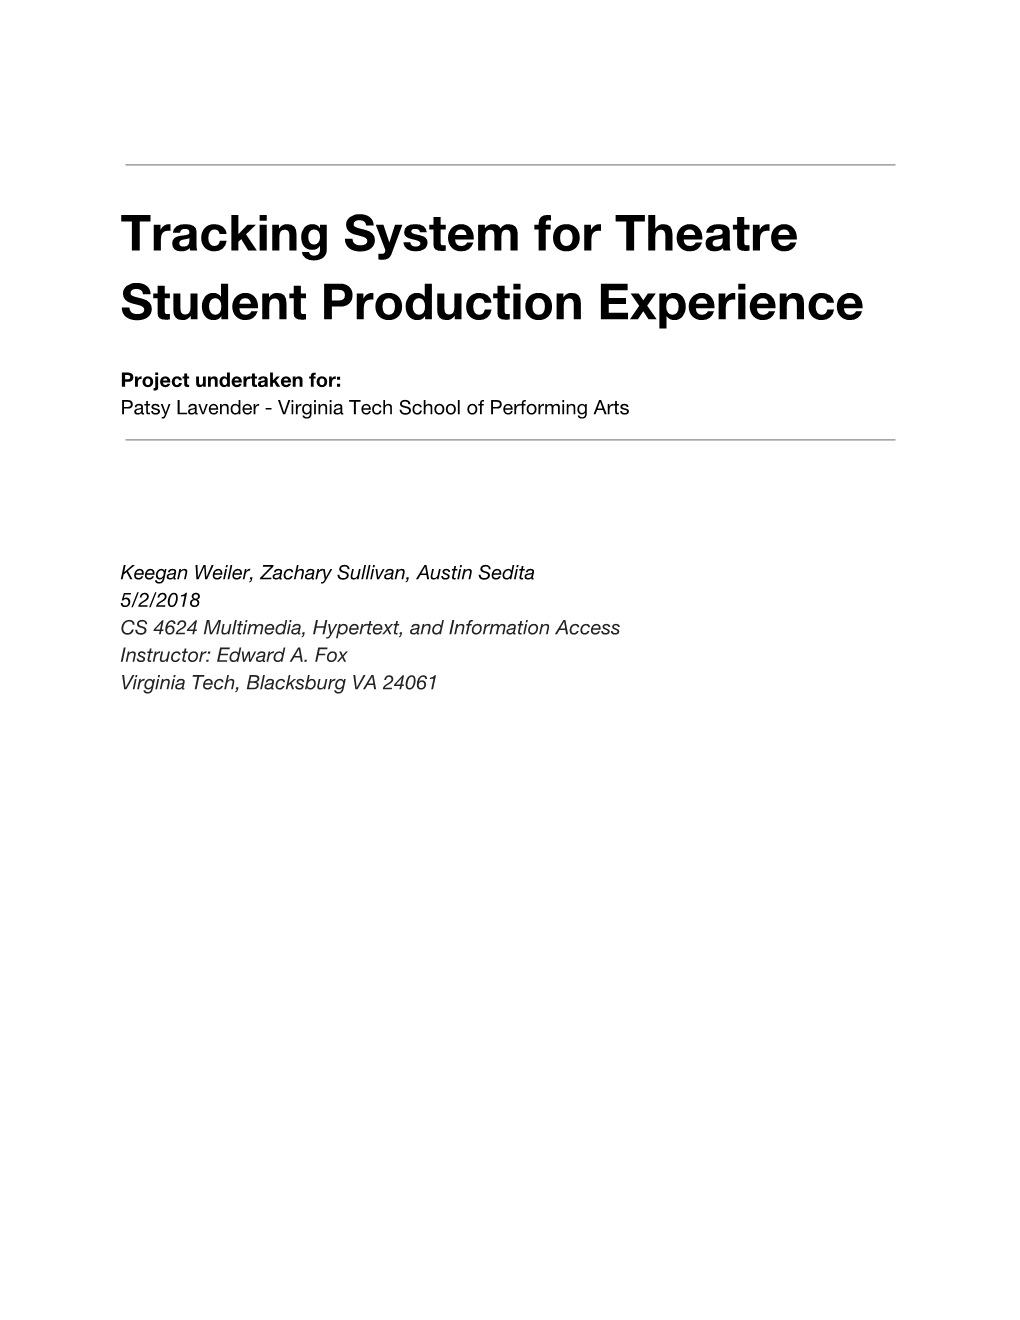 Tracking System for Theatre Student Production Experience